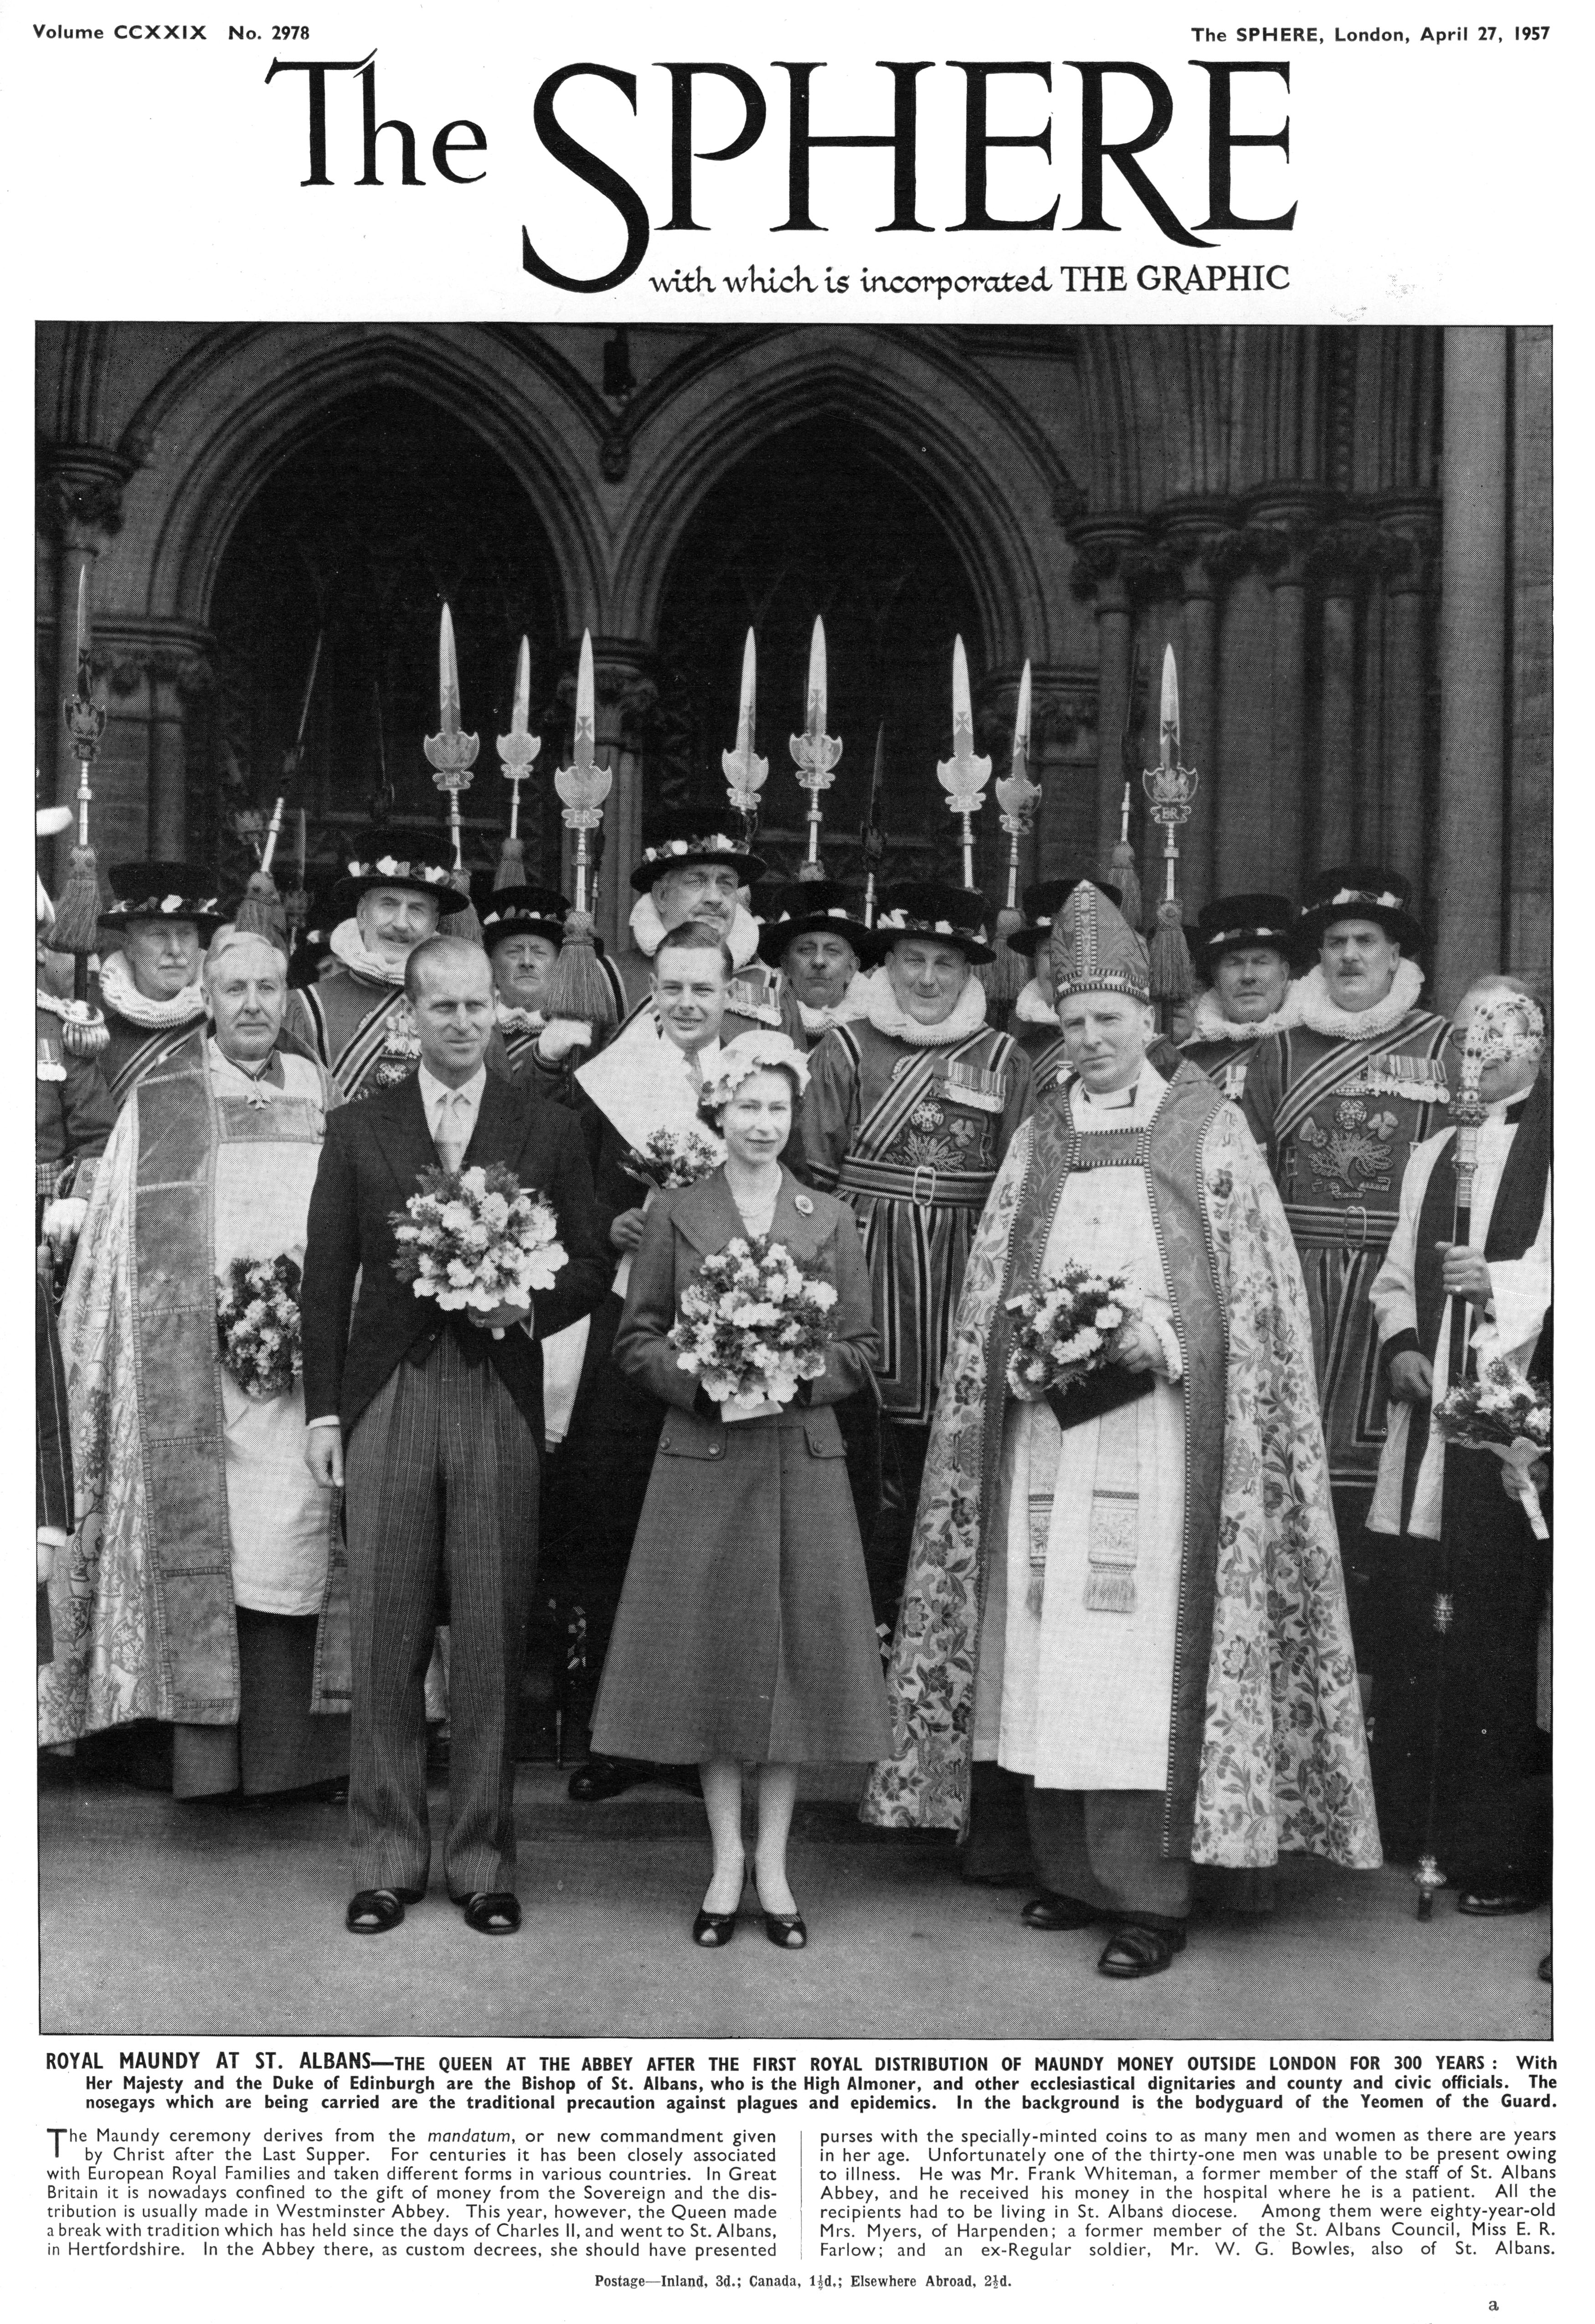 First Anniversary The Queen’s Death - The Queen at the abbey after the royal distribution of maundy money in 1957